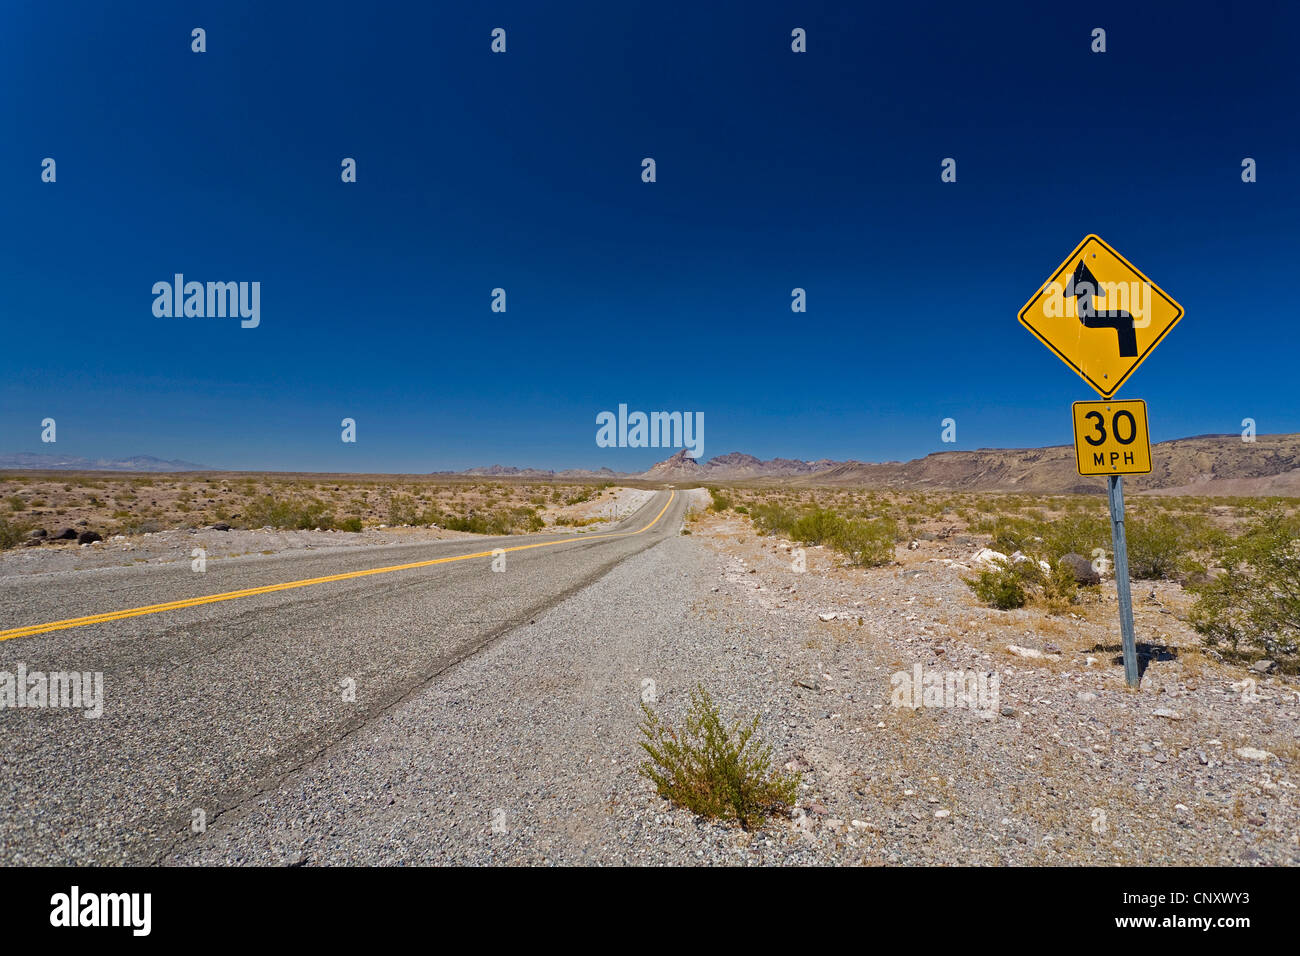 historical Route 66 with curvy road and speed limit signs, USA, Arizona Stock Photo